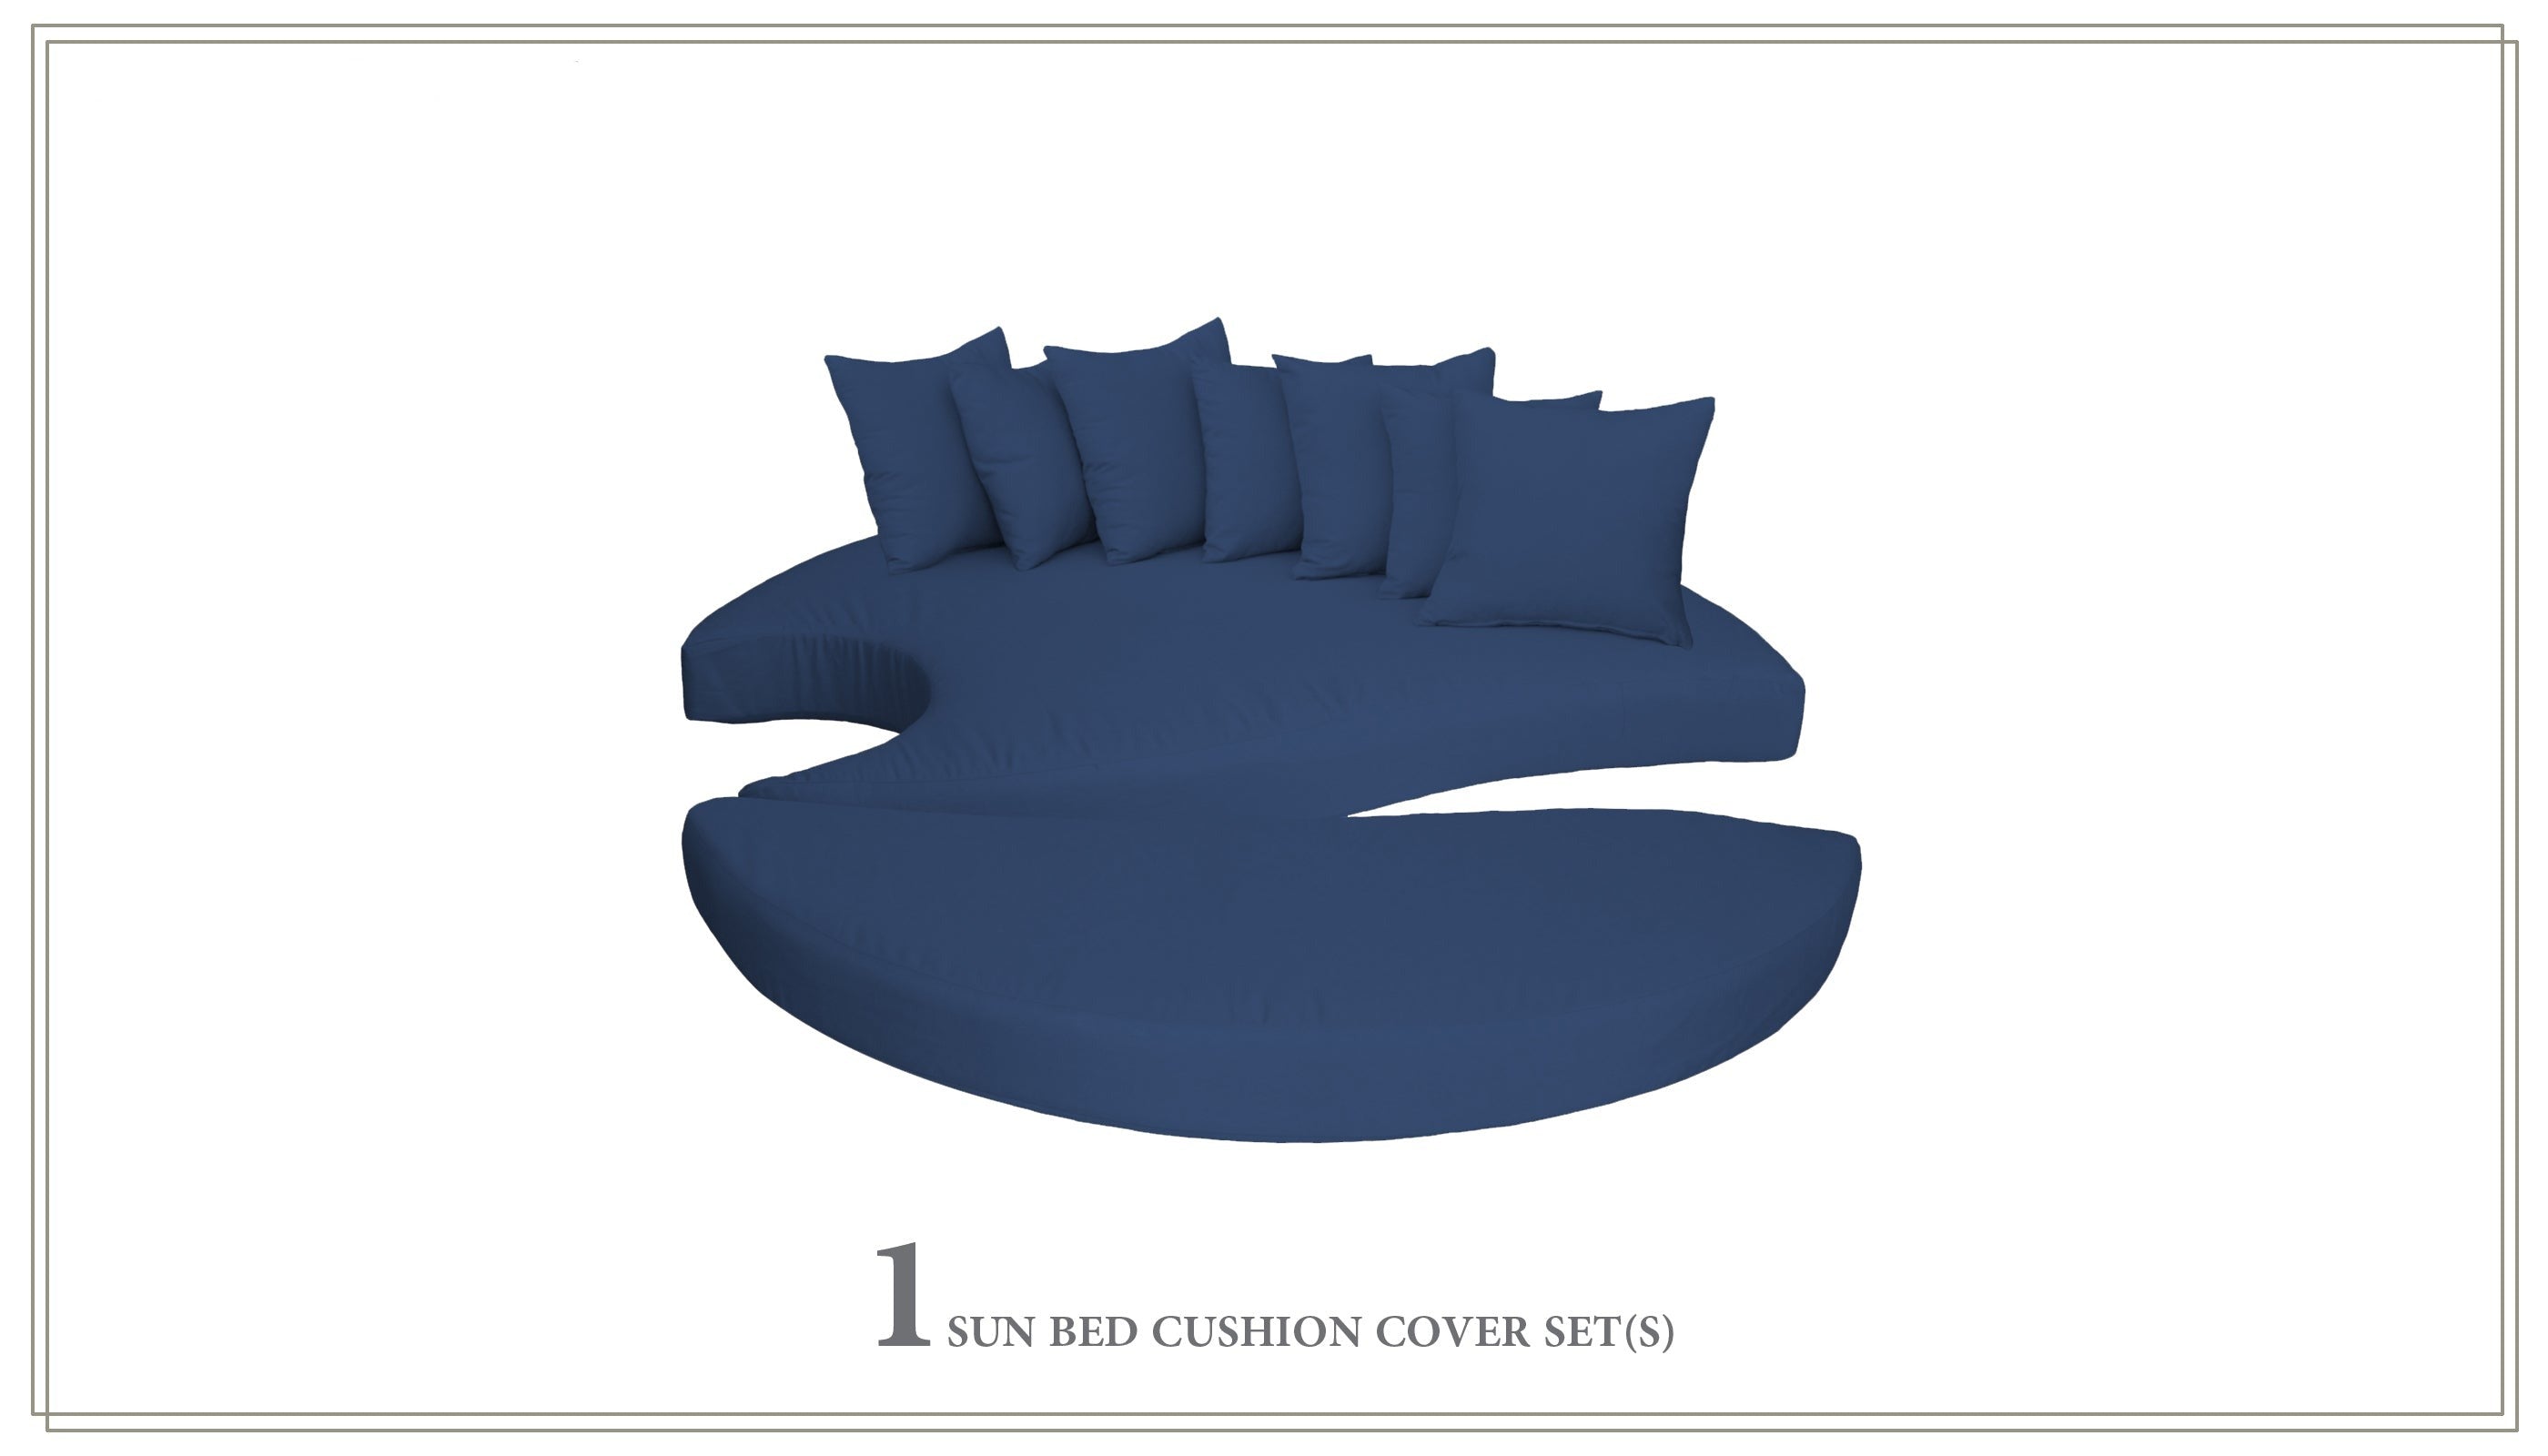 Cushions for Sun Bed